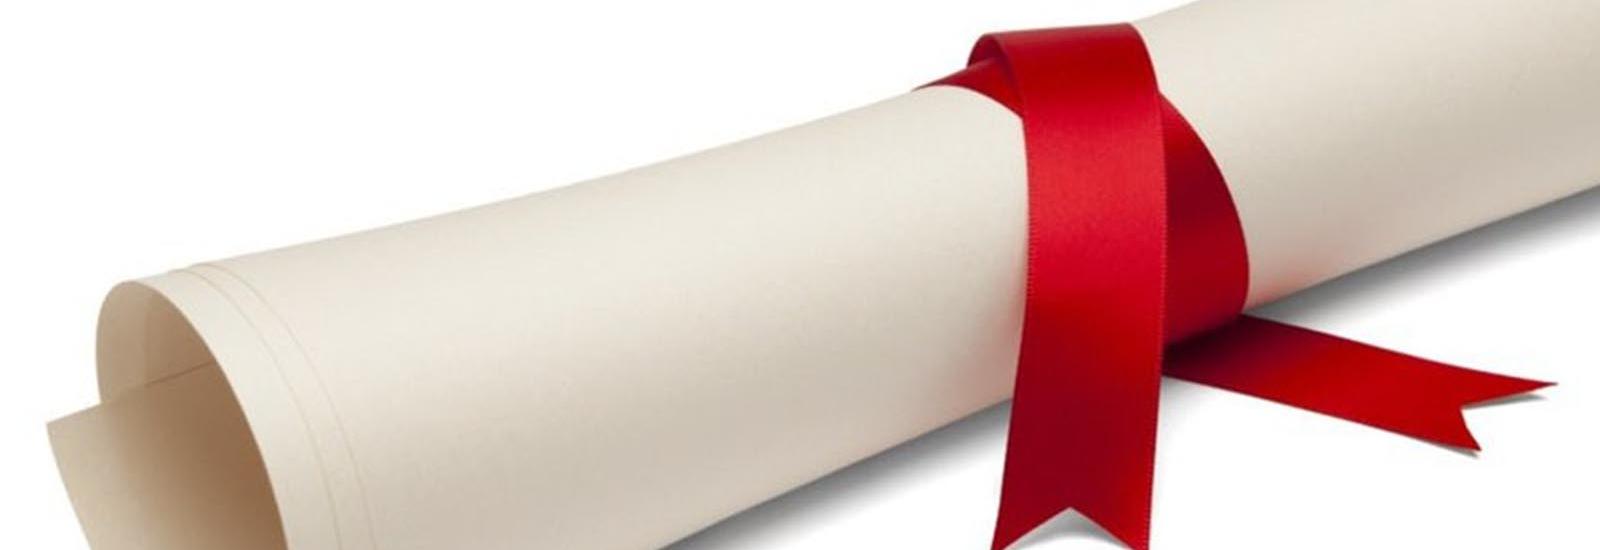 rolled diploma